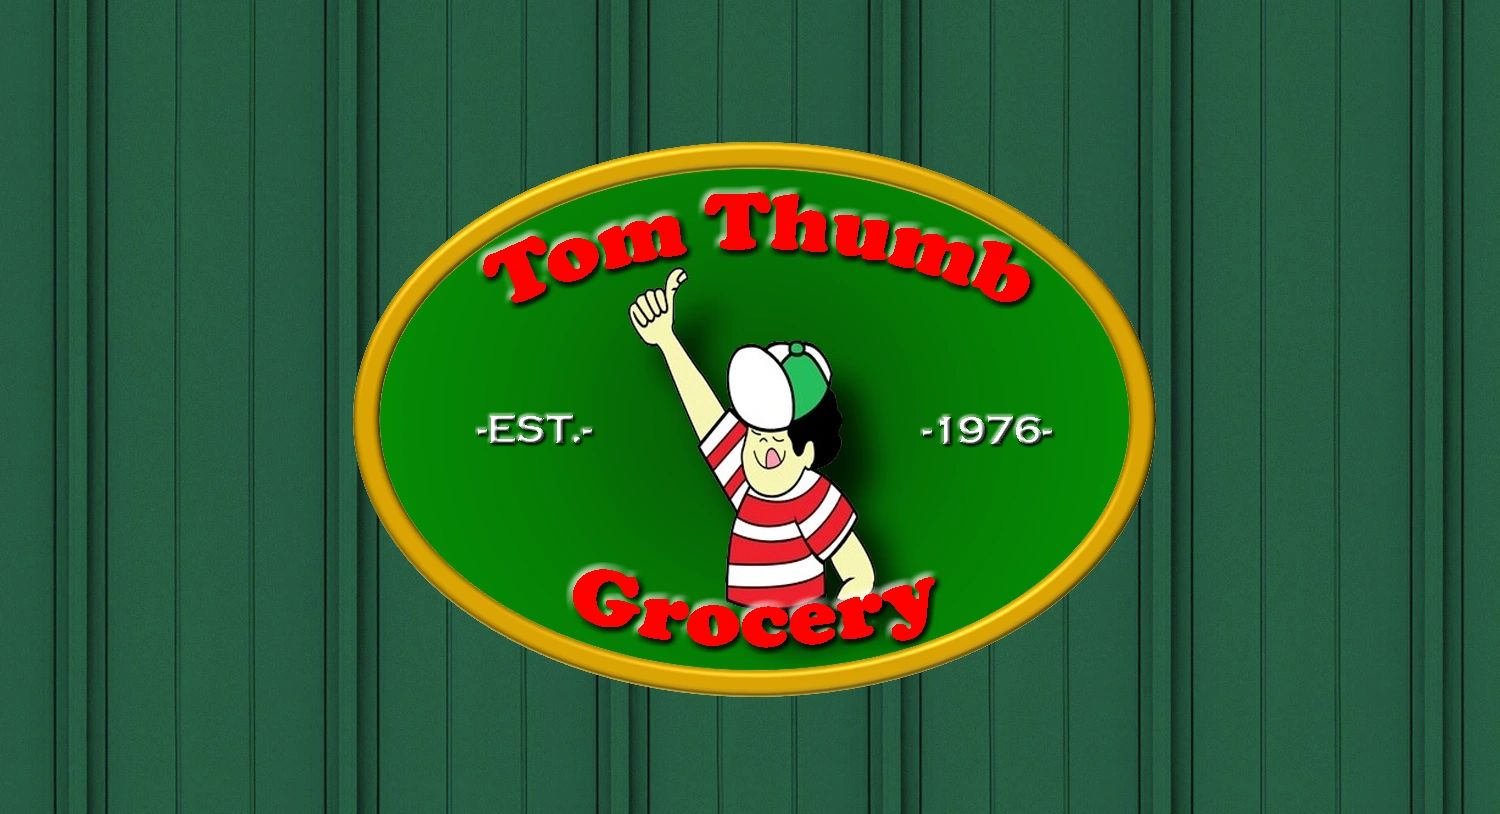 Tom thumb logo on green colored corrugated metal background mimicking our building's facade.